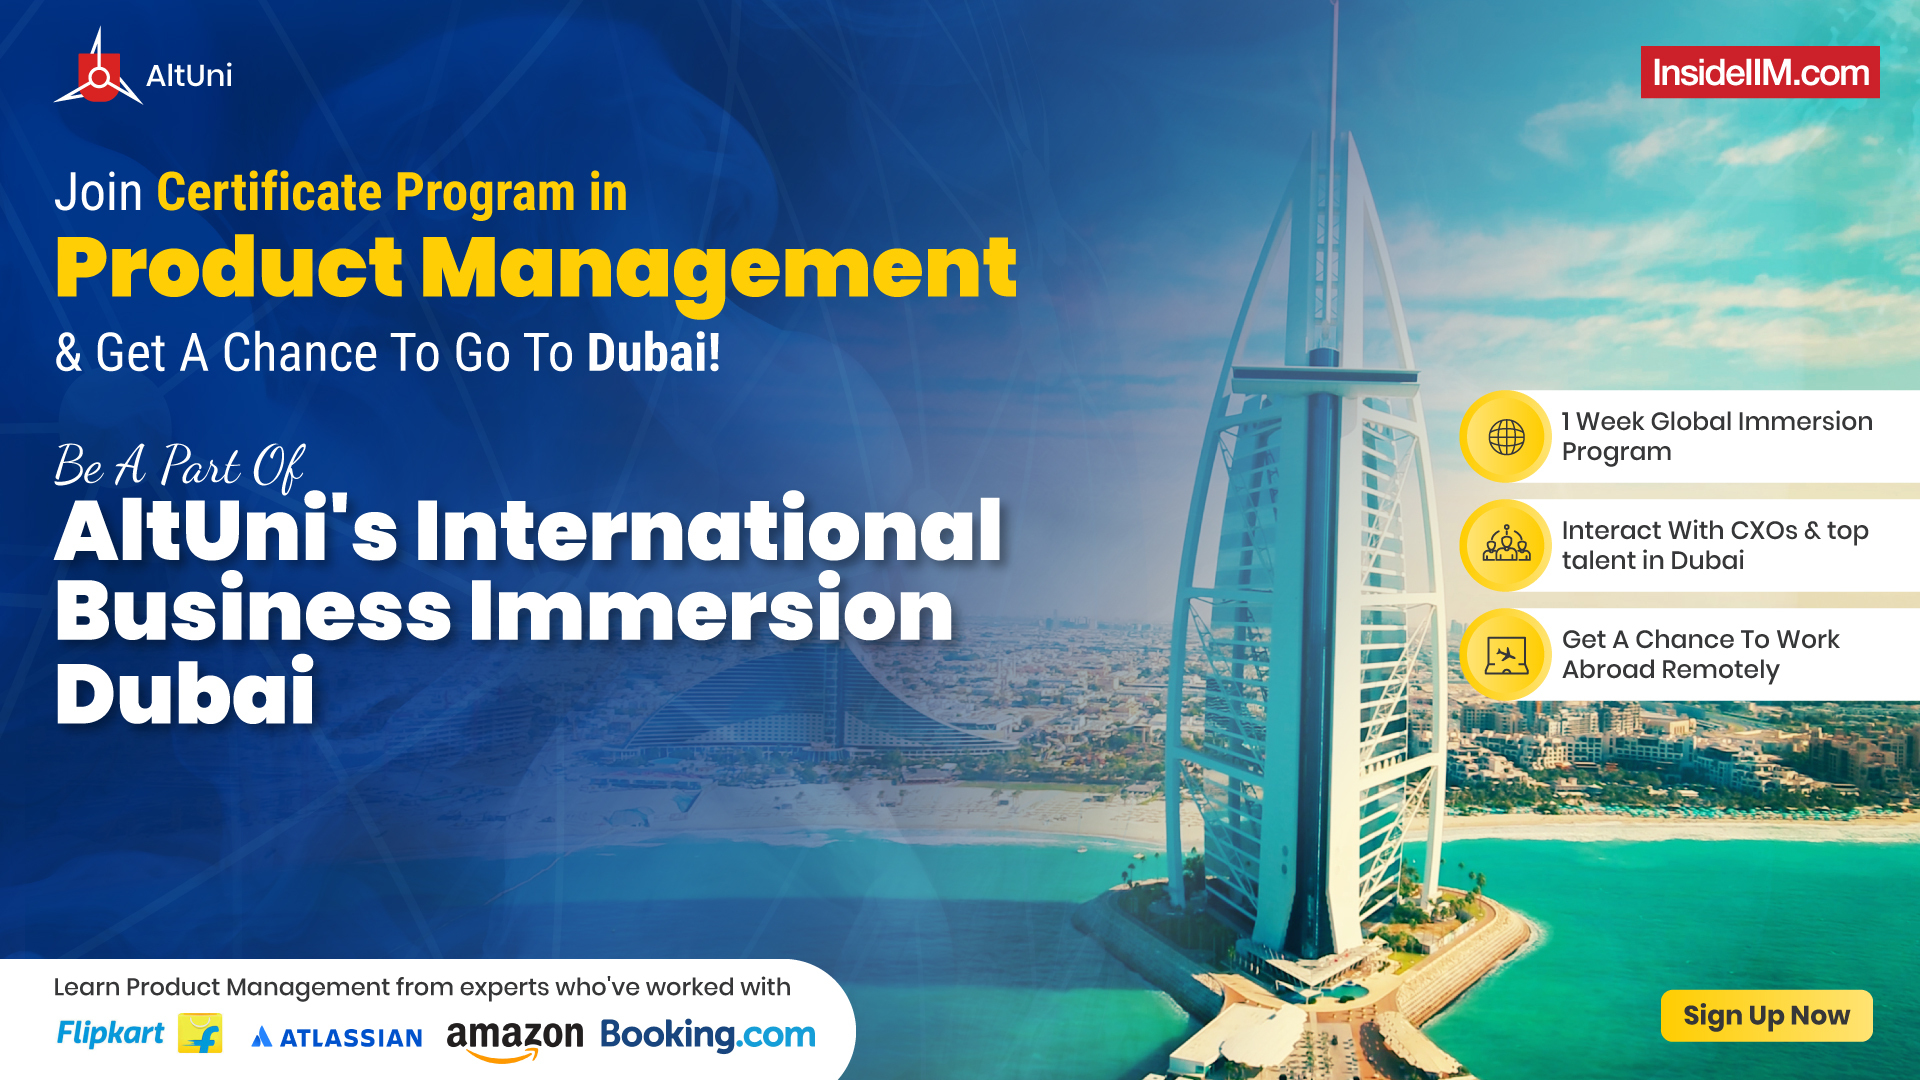 Join AltUni's Certificate Program In Product Management & Get A Chance To Go To Dubai | Check Details Here!